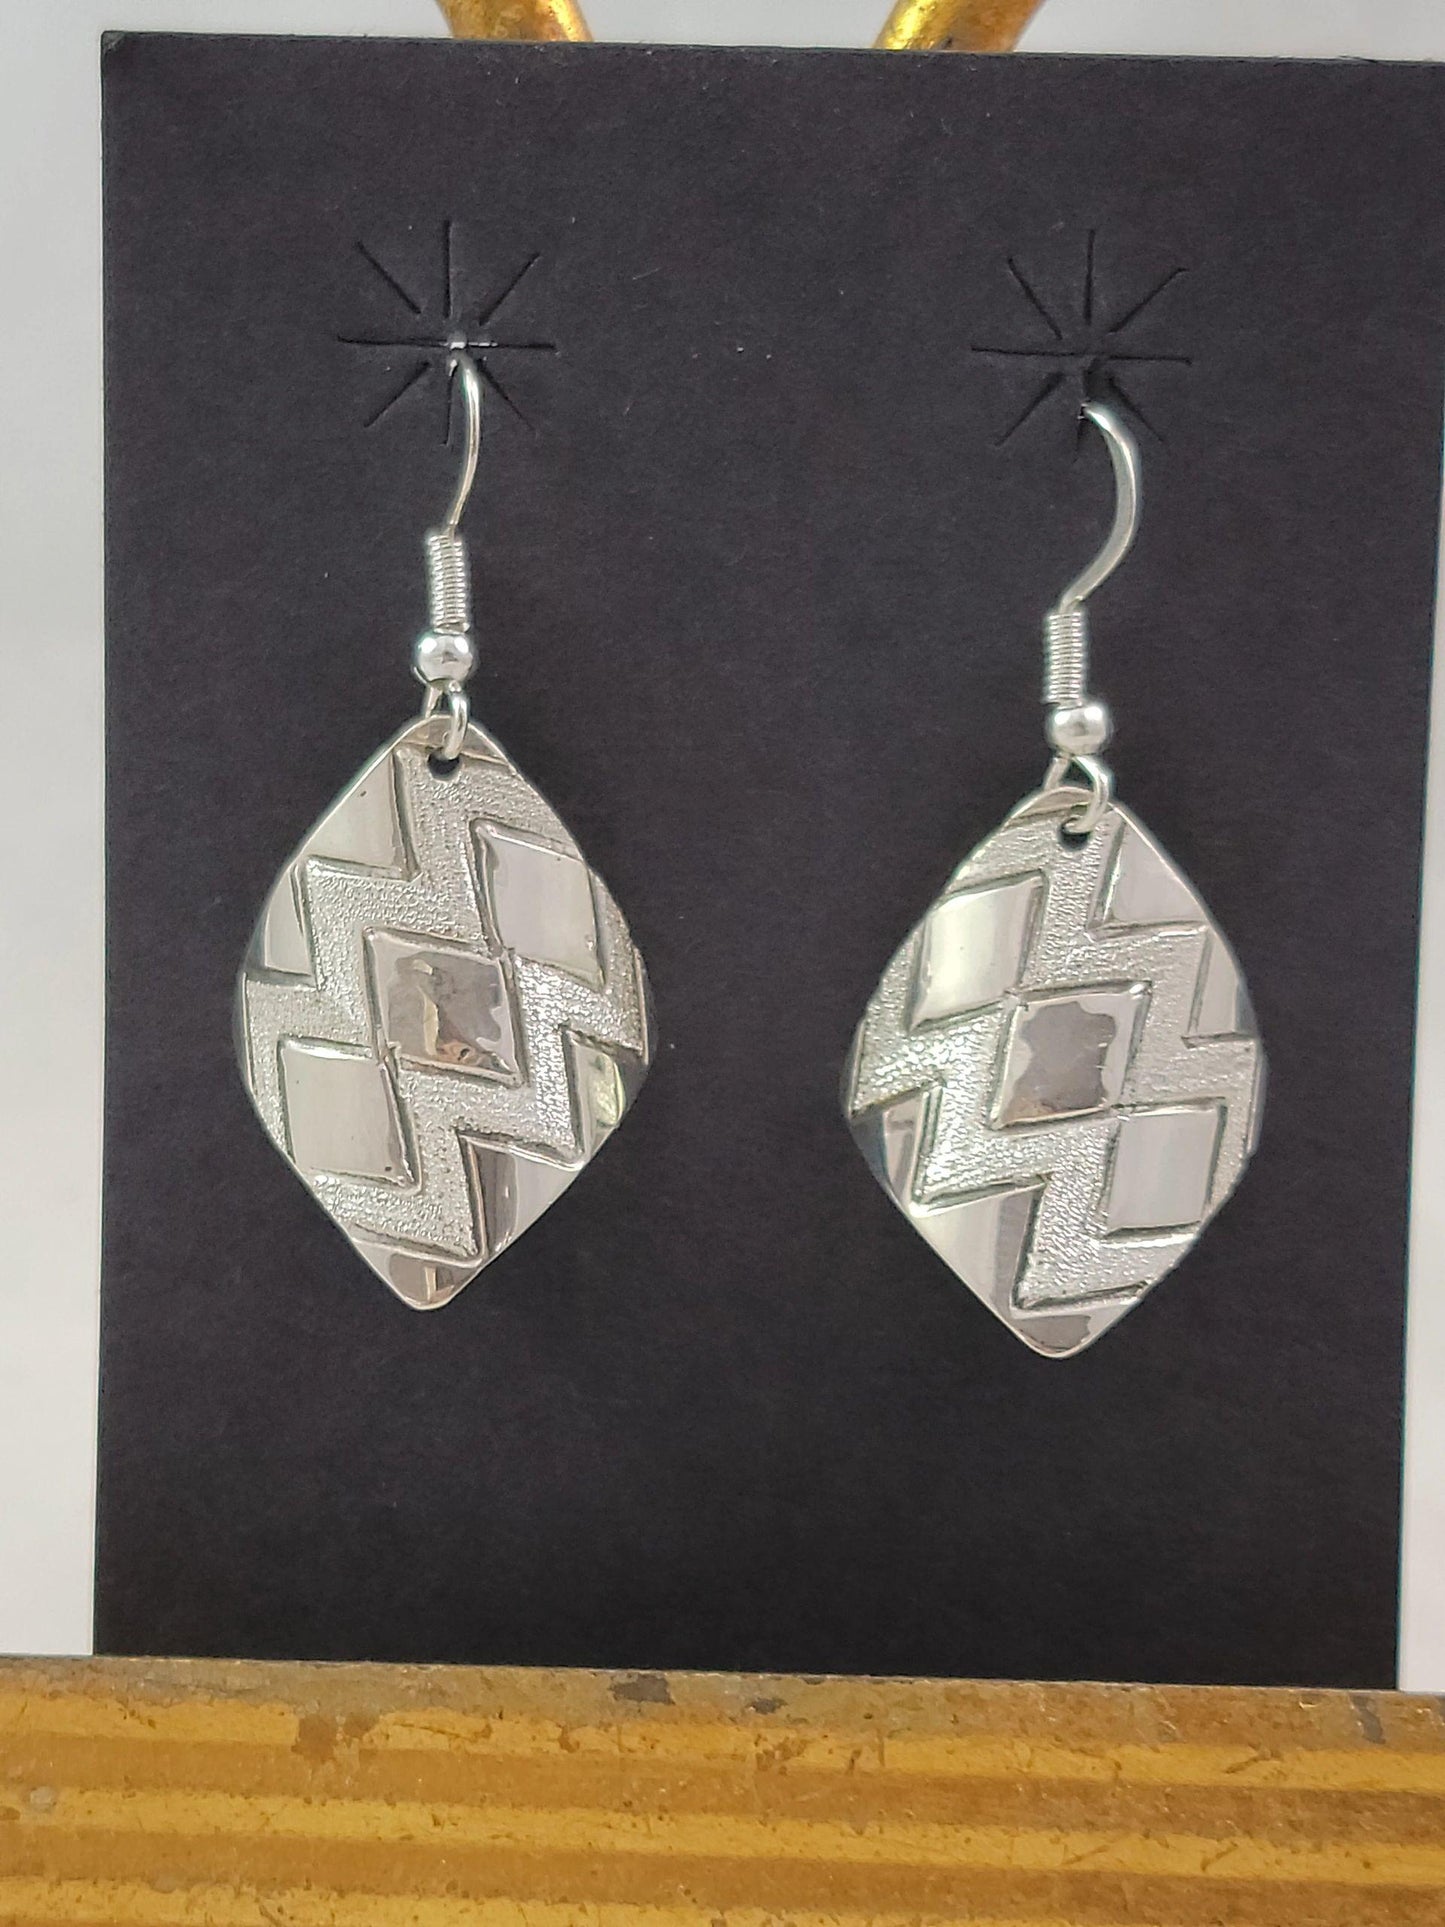 Zigzag rolled 1 inch earrings - Albuquerque Pawn Shop